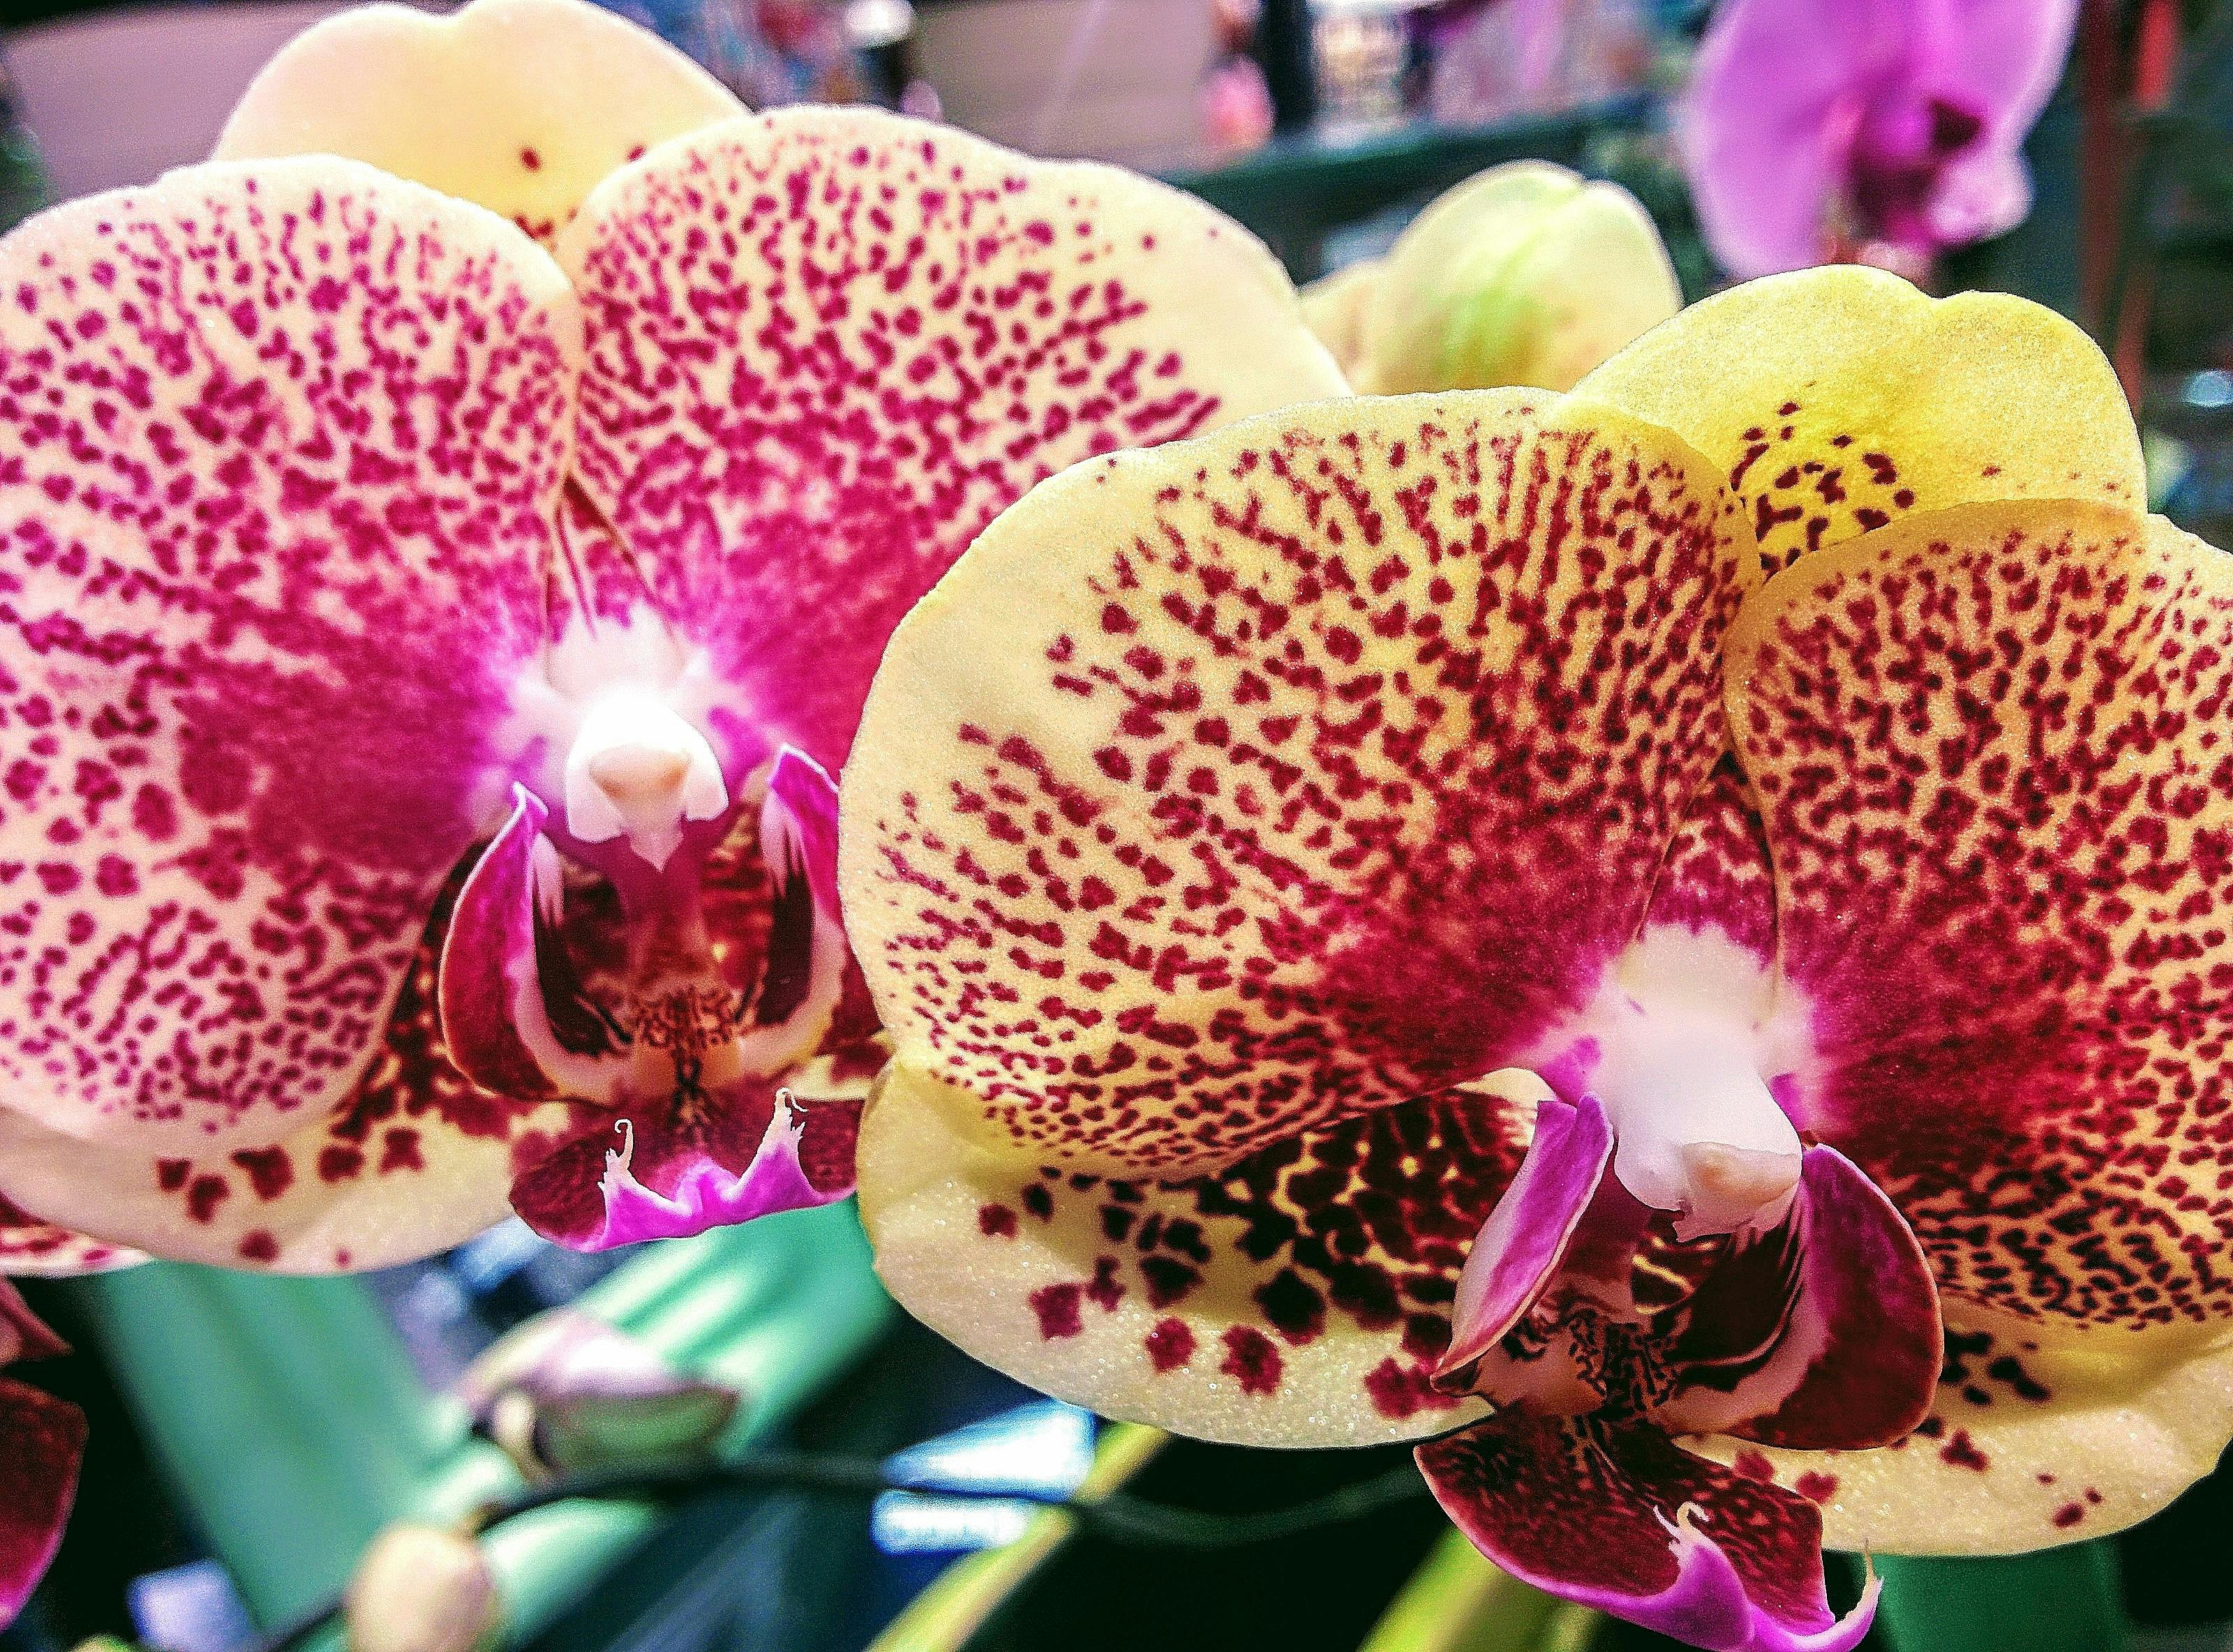 Free stock photo of amber lamoreaux, close up orchid, close up orchids